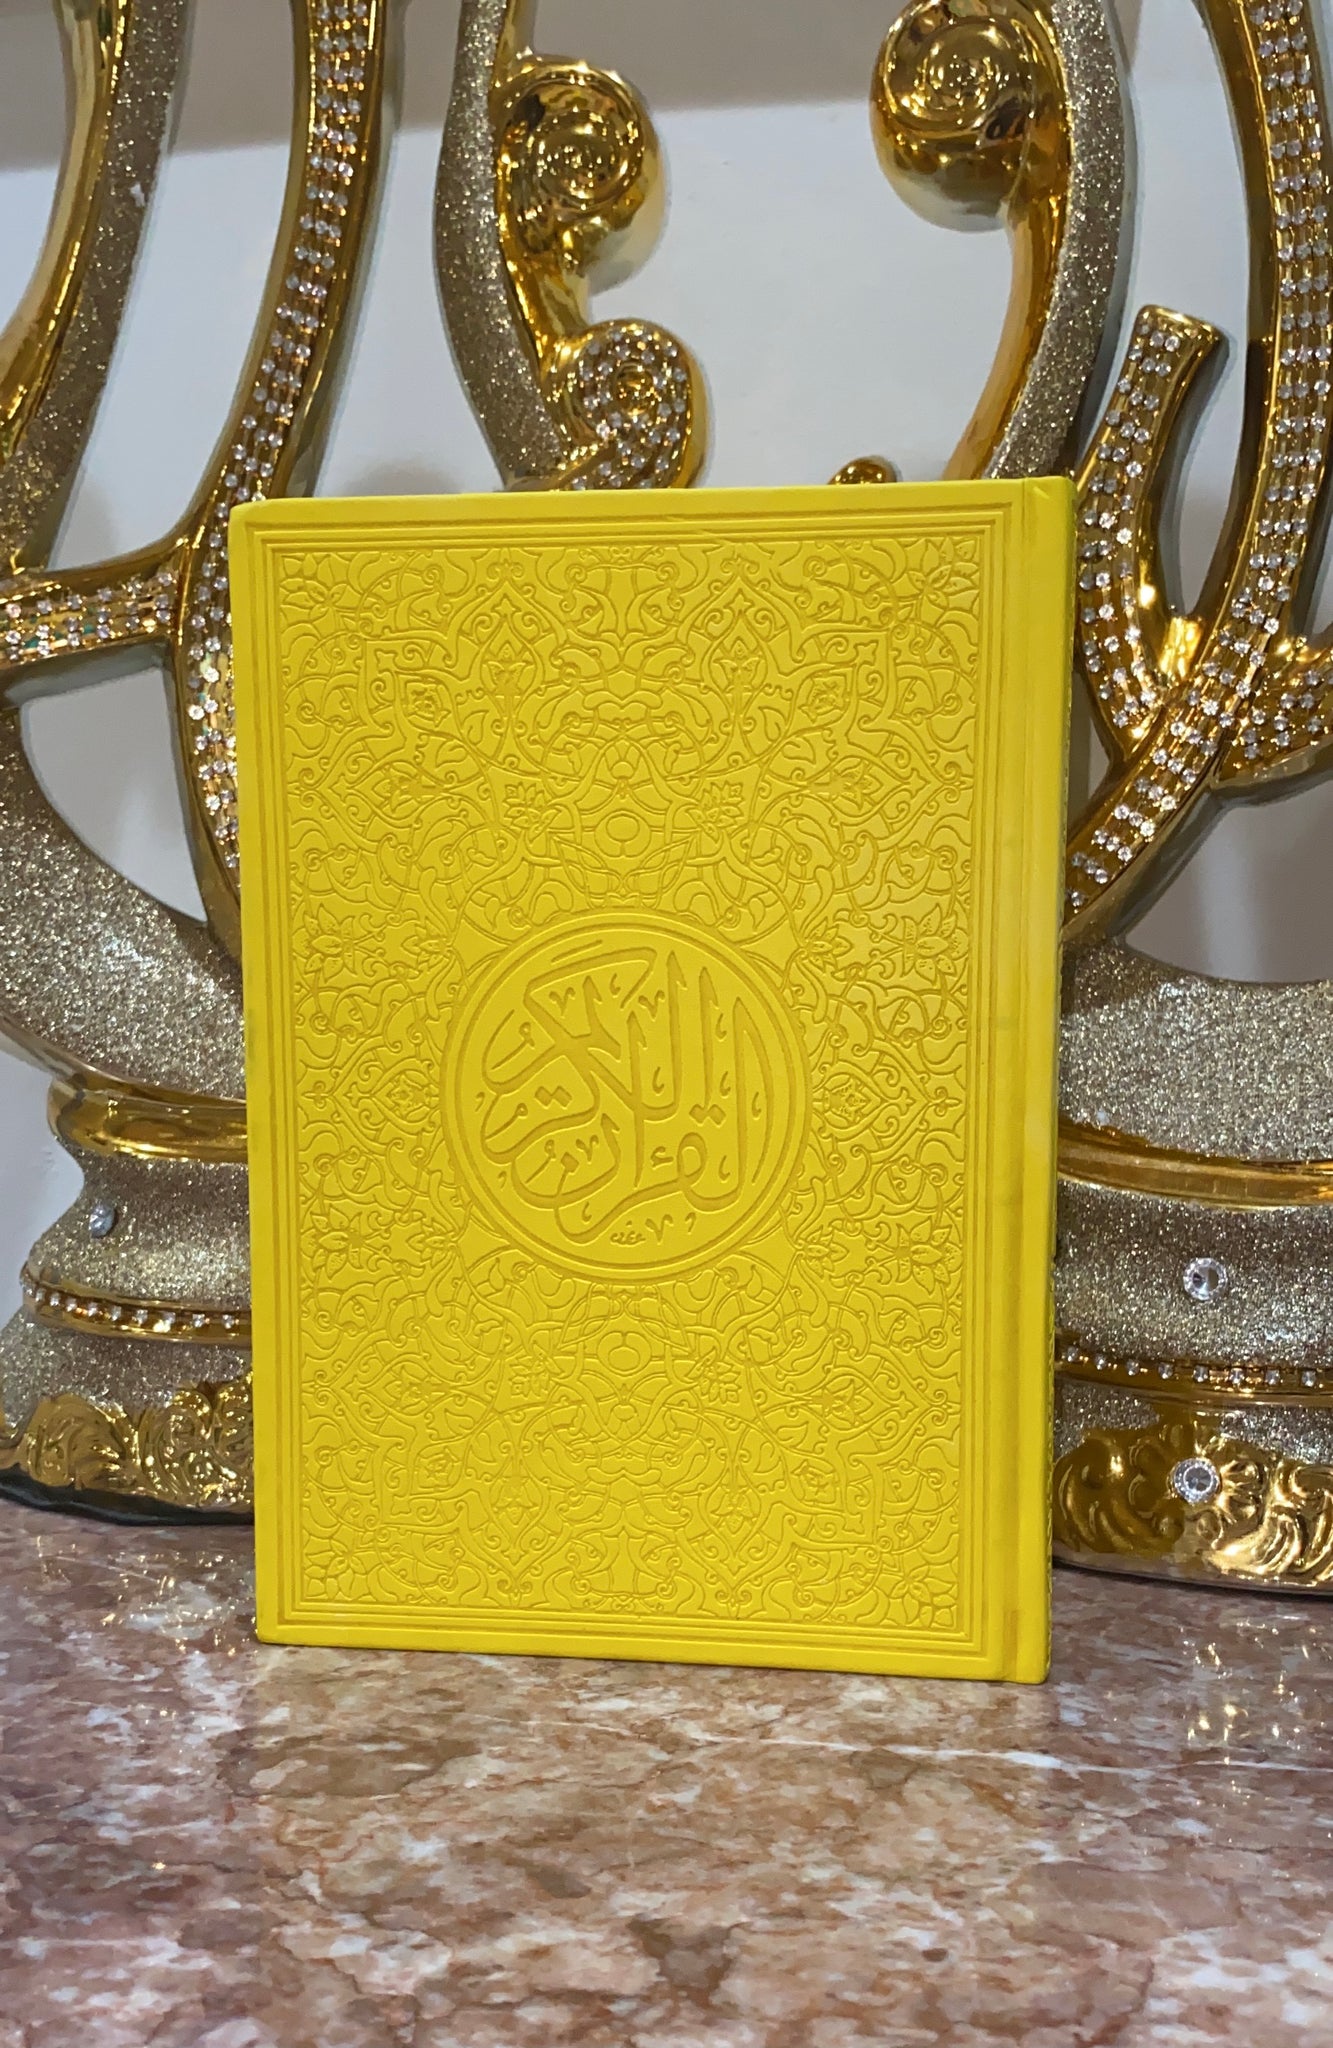 Large Yellow Qur’an